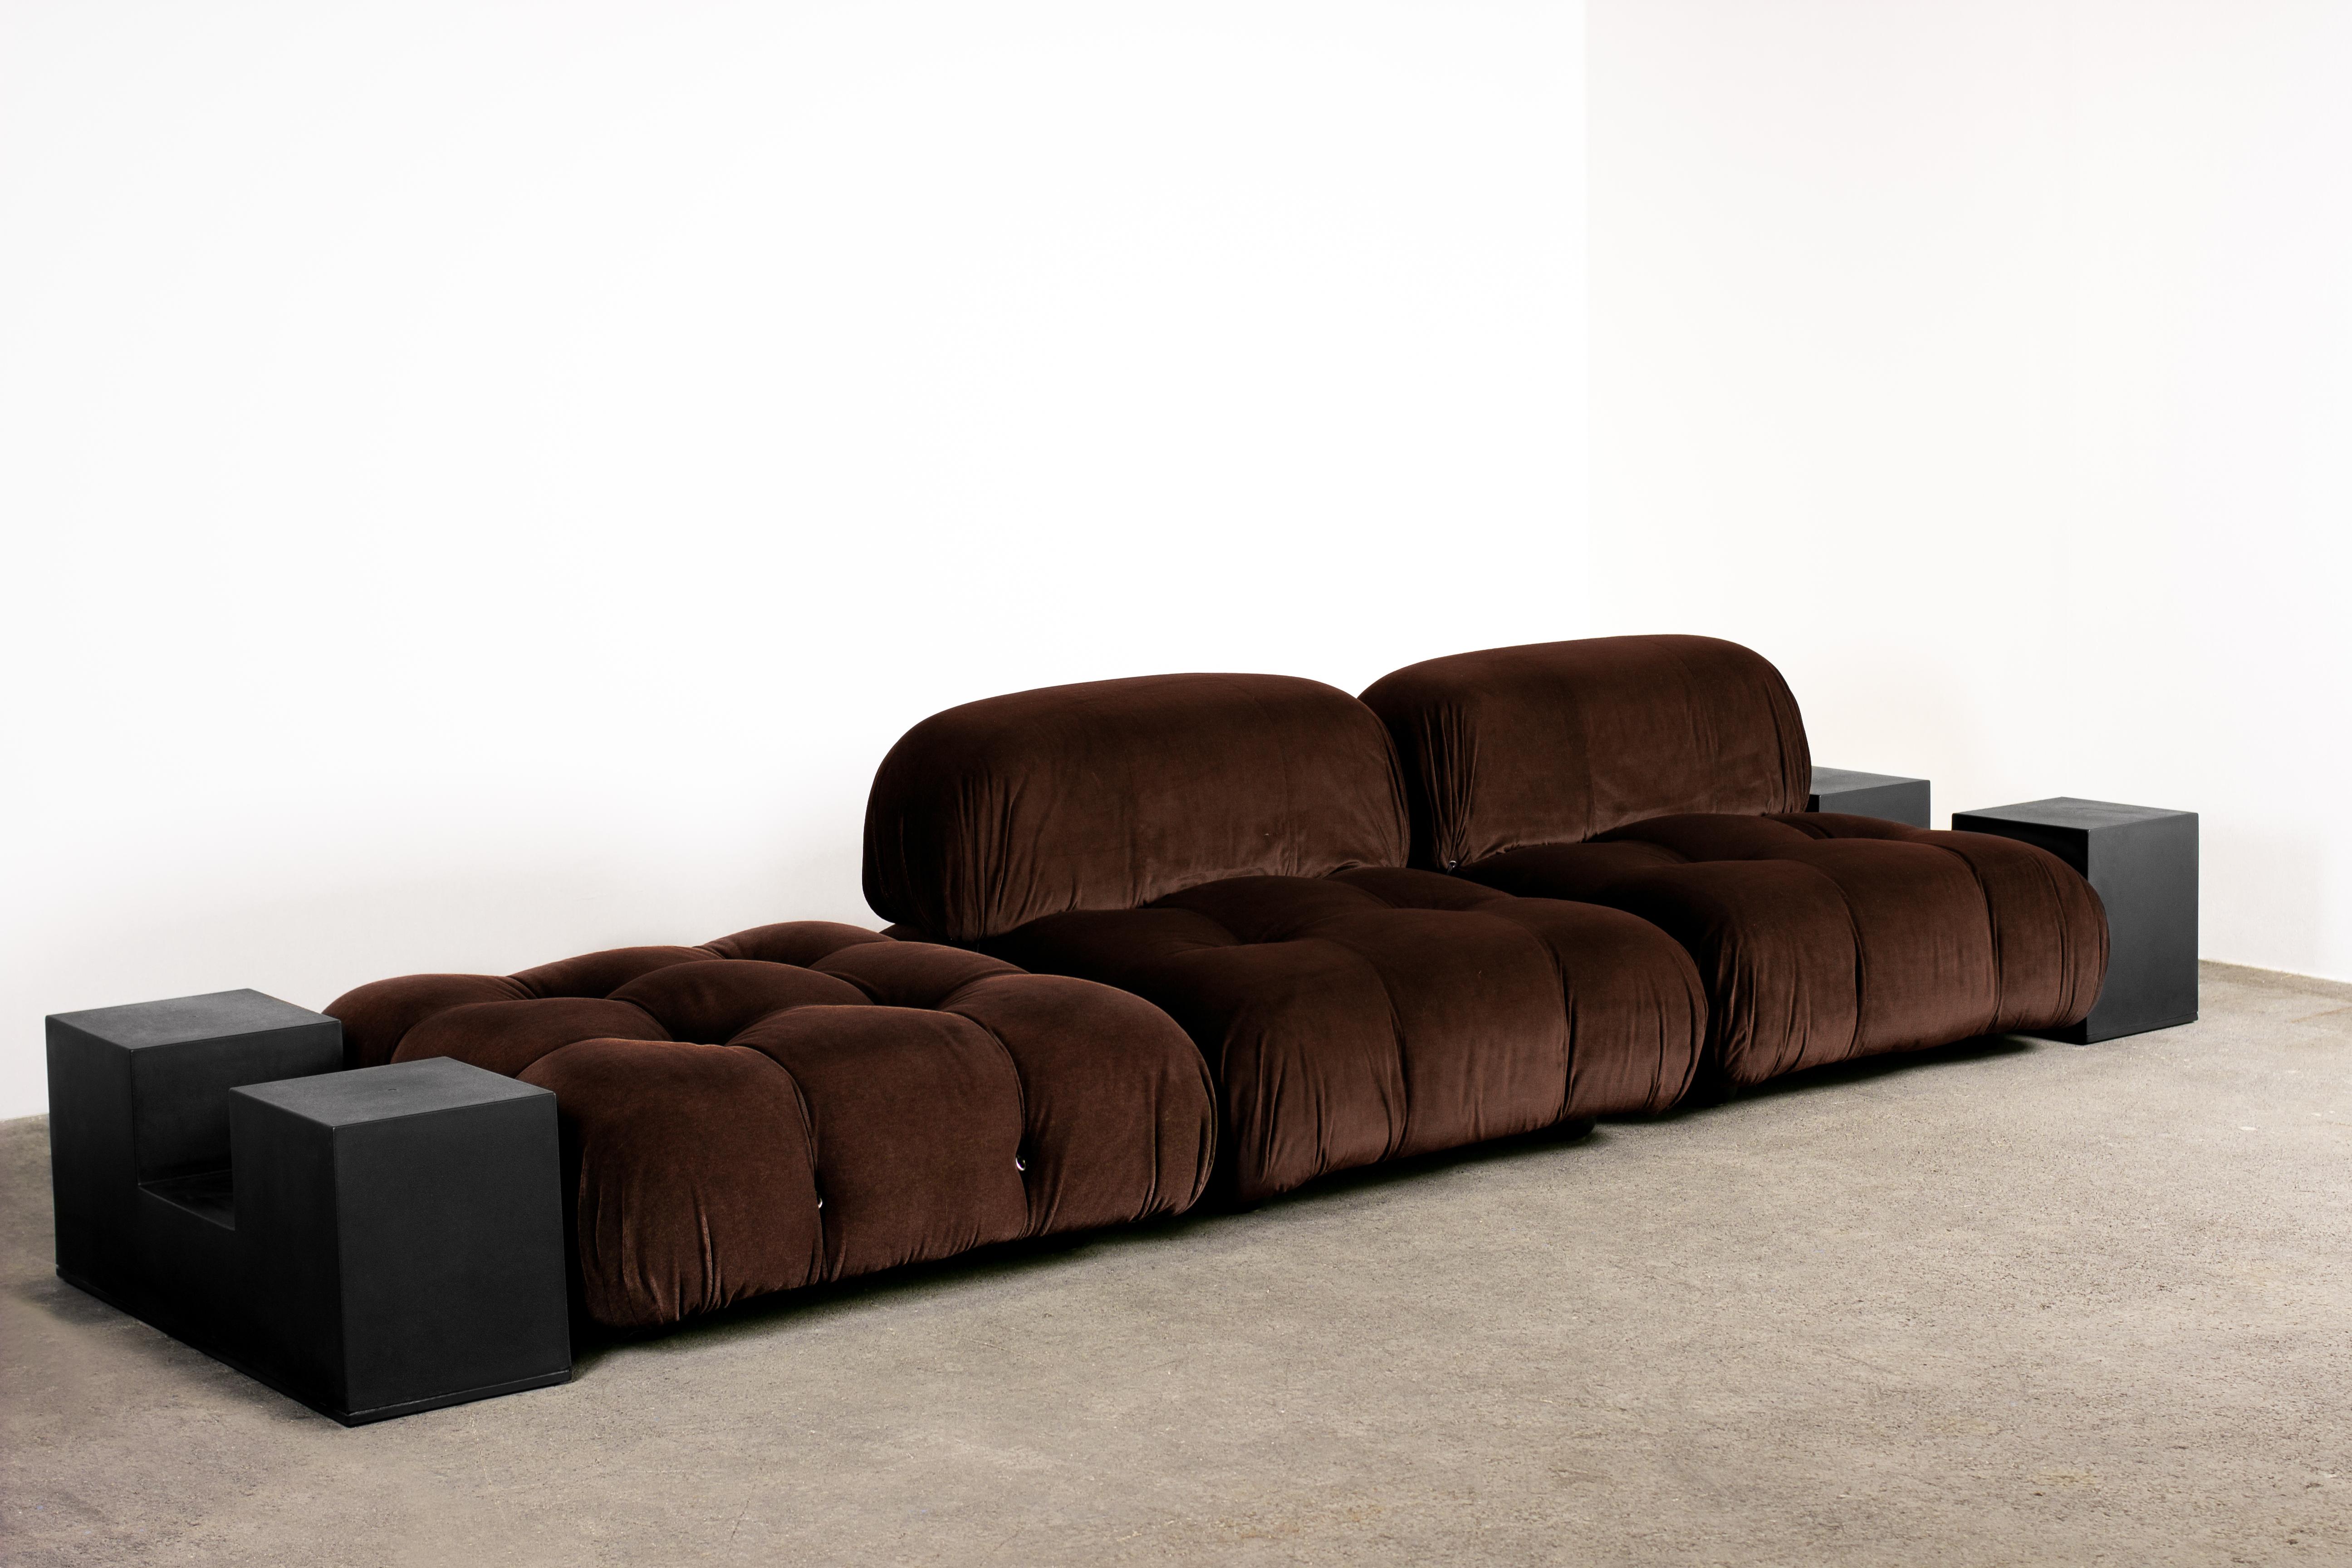 Early C&B Italia (now B&B Italia) 3-piece Camaleonda sectional sofa by Mario Bellini in chocolate brown velvet. Consists of two lounge chairs and one ottoman.